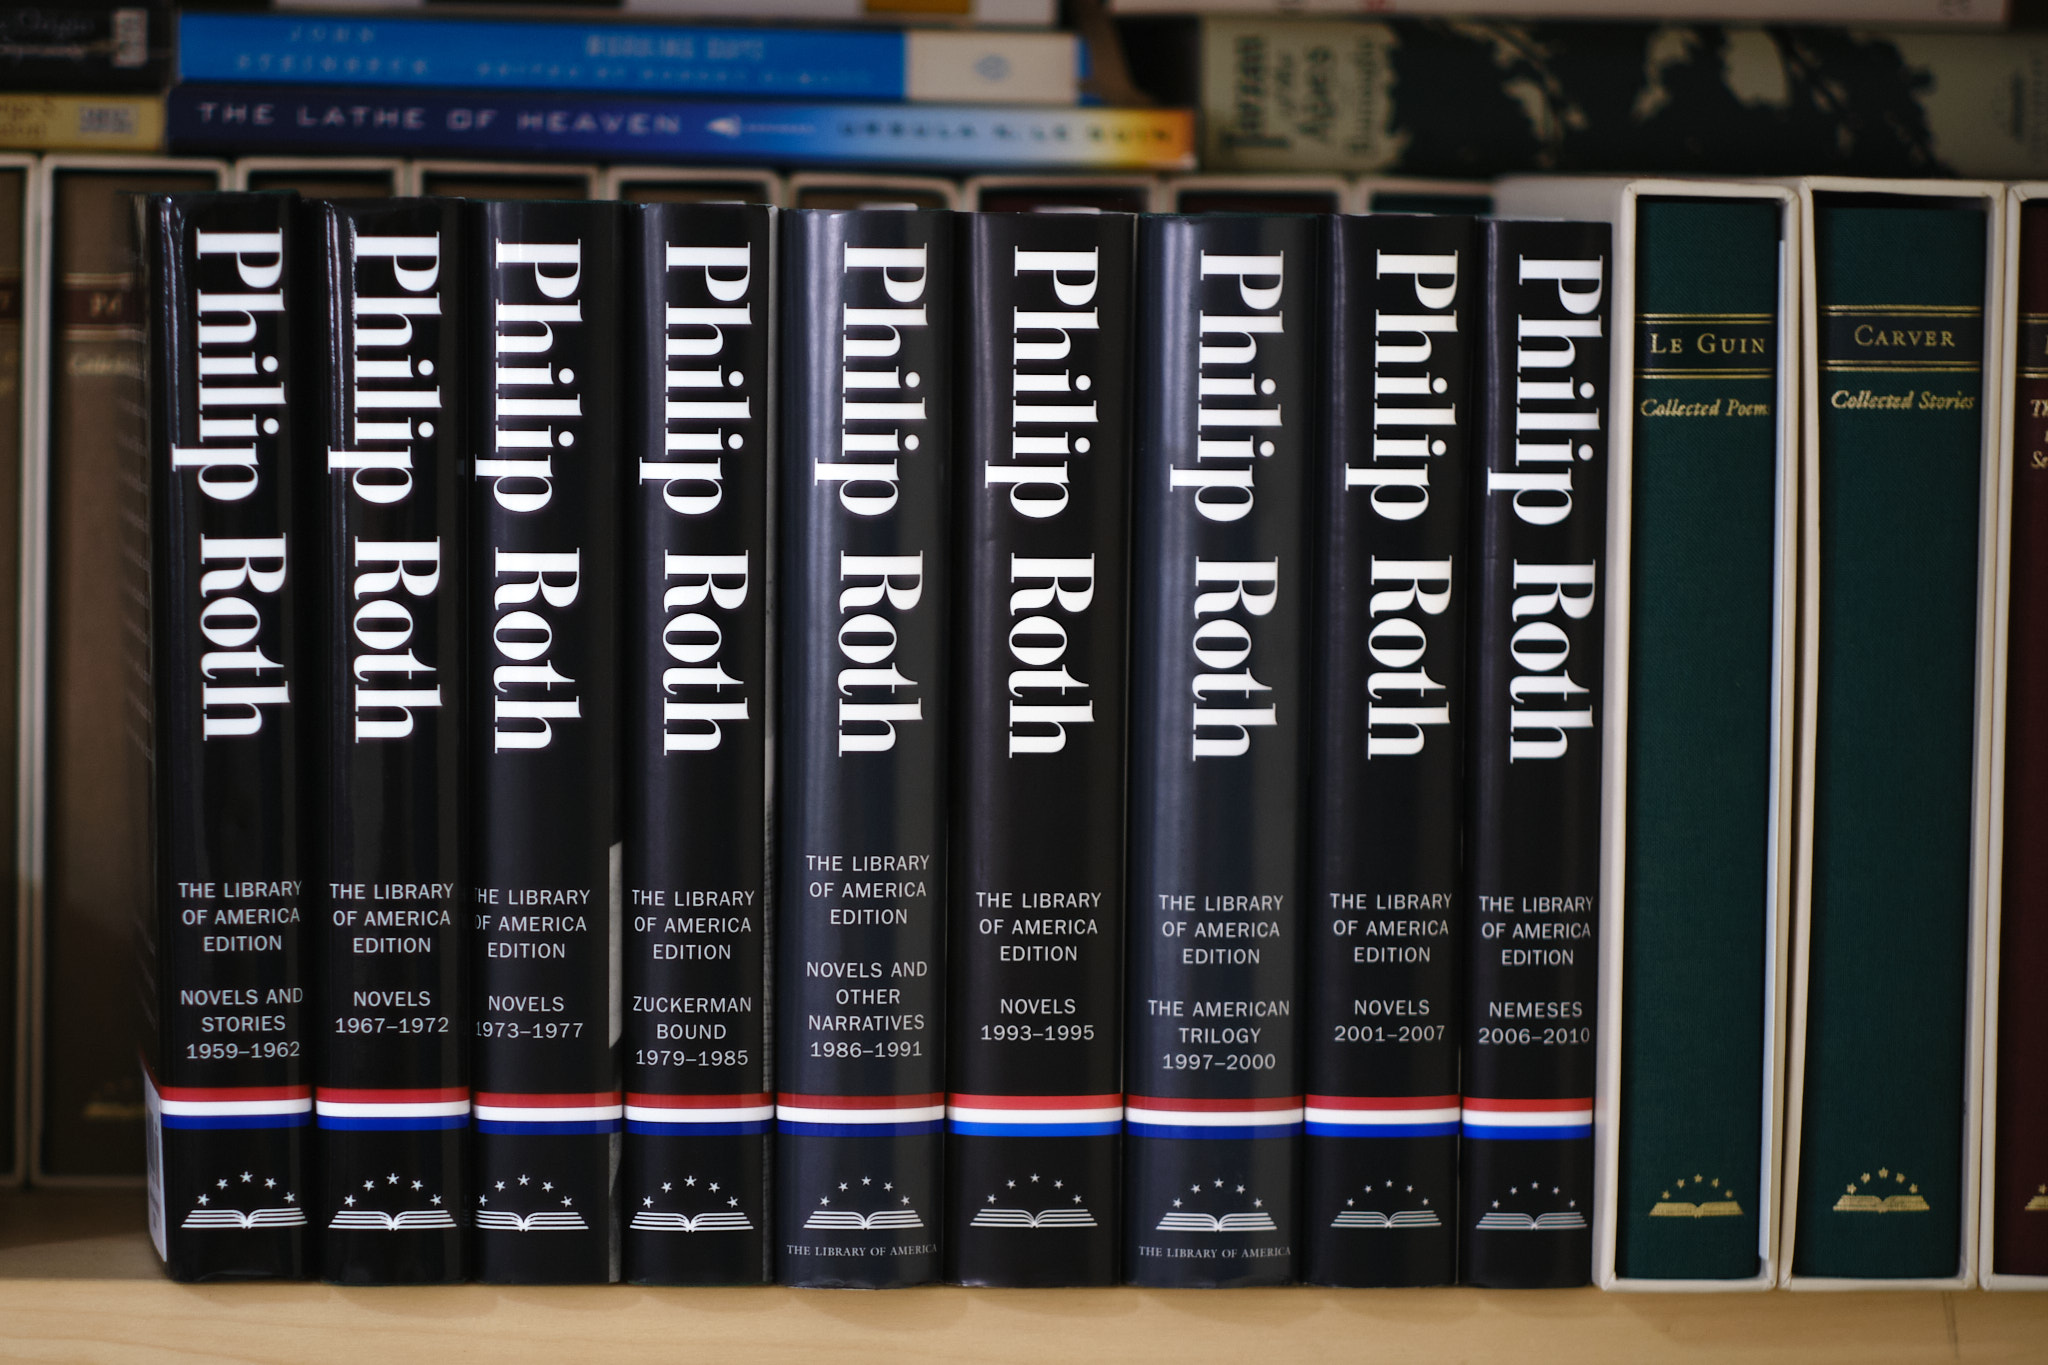 Library of America's nine volume collection of Philip Roth's novels displayed on a bookshelf in chronological order